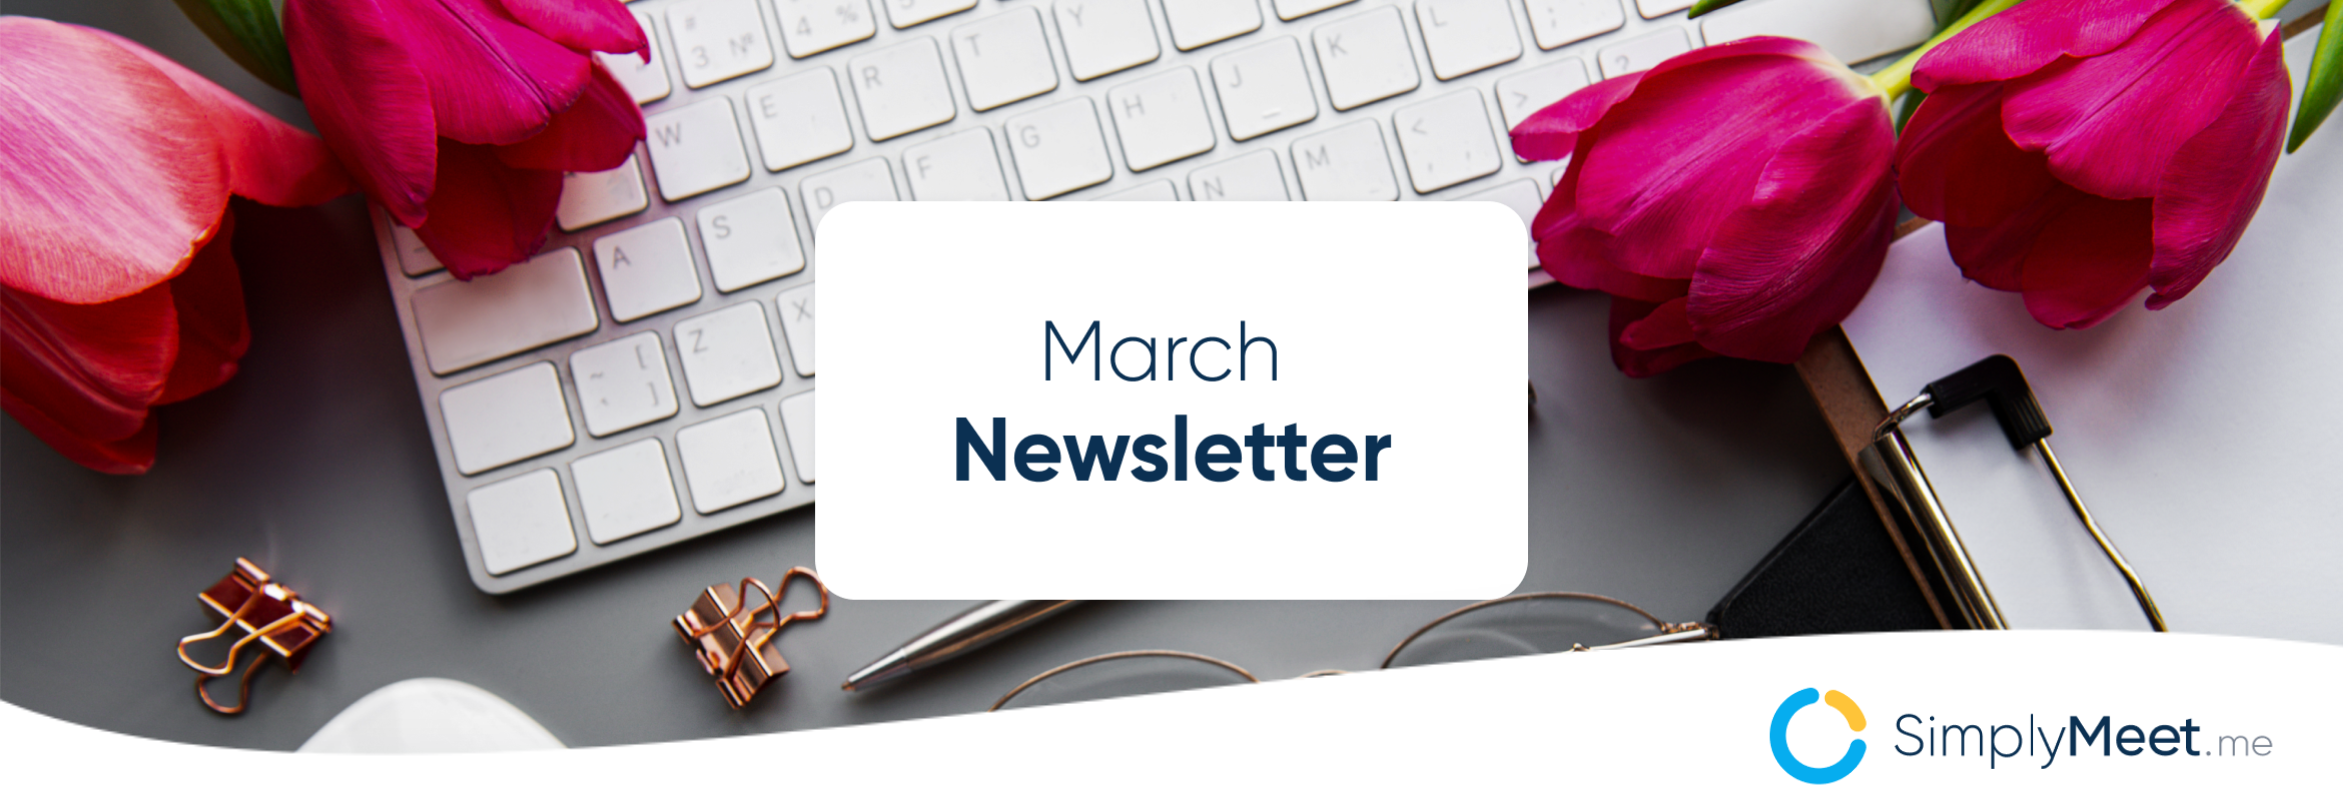 March Newsletter: Development and releases from SimplyMeet.me